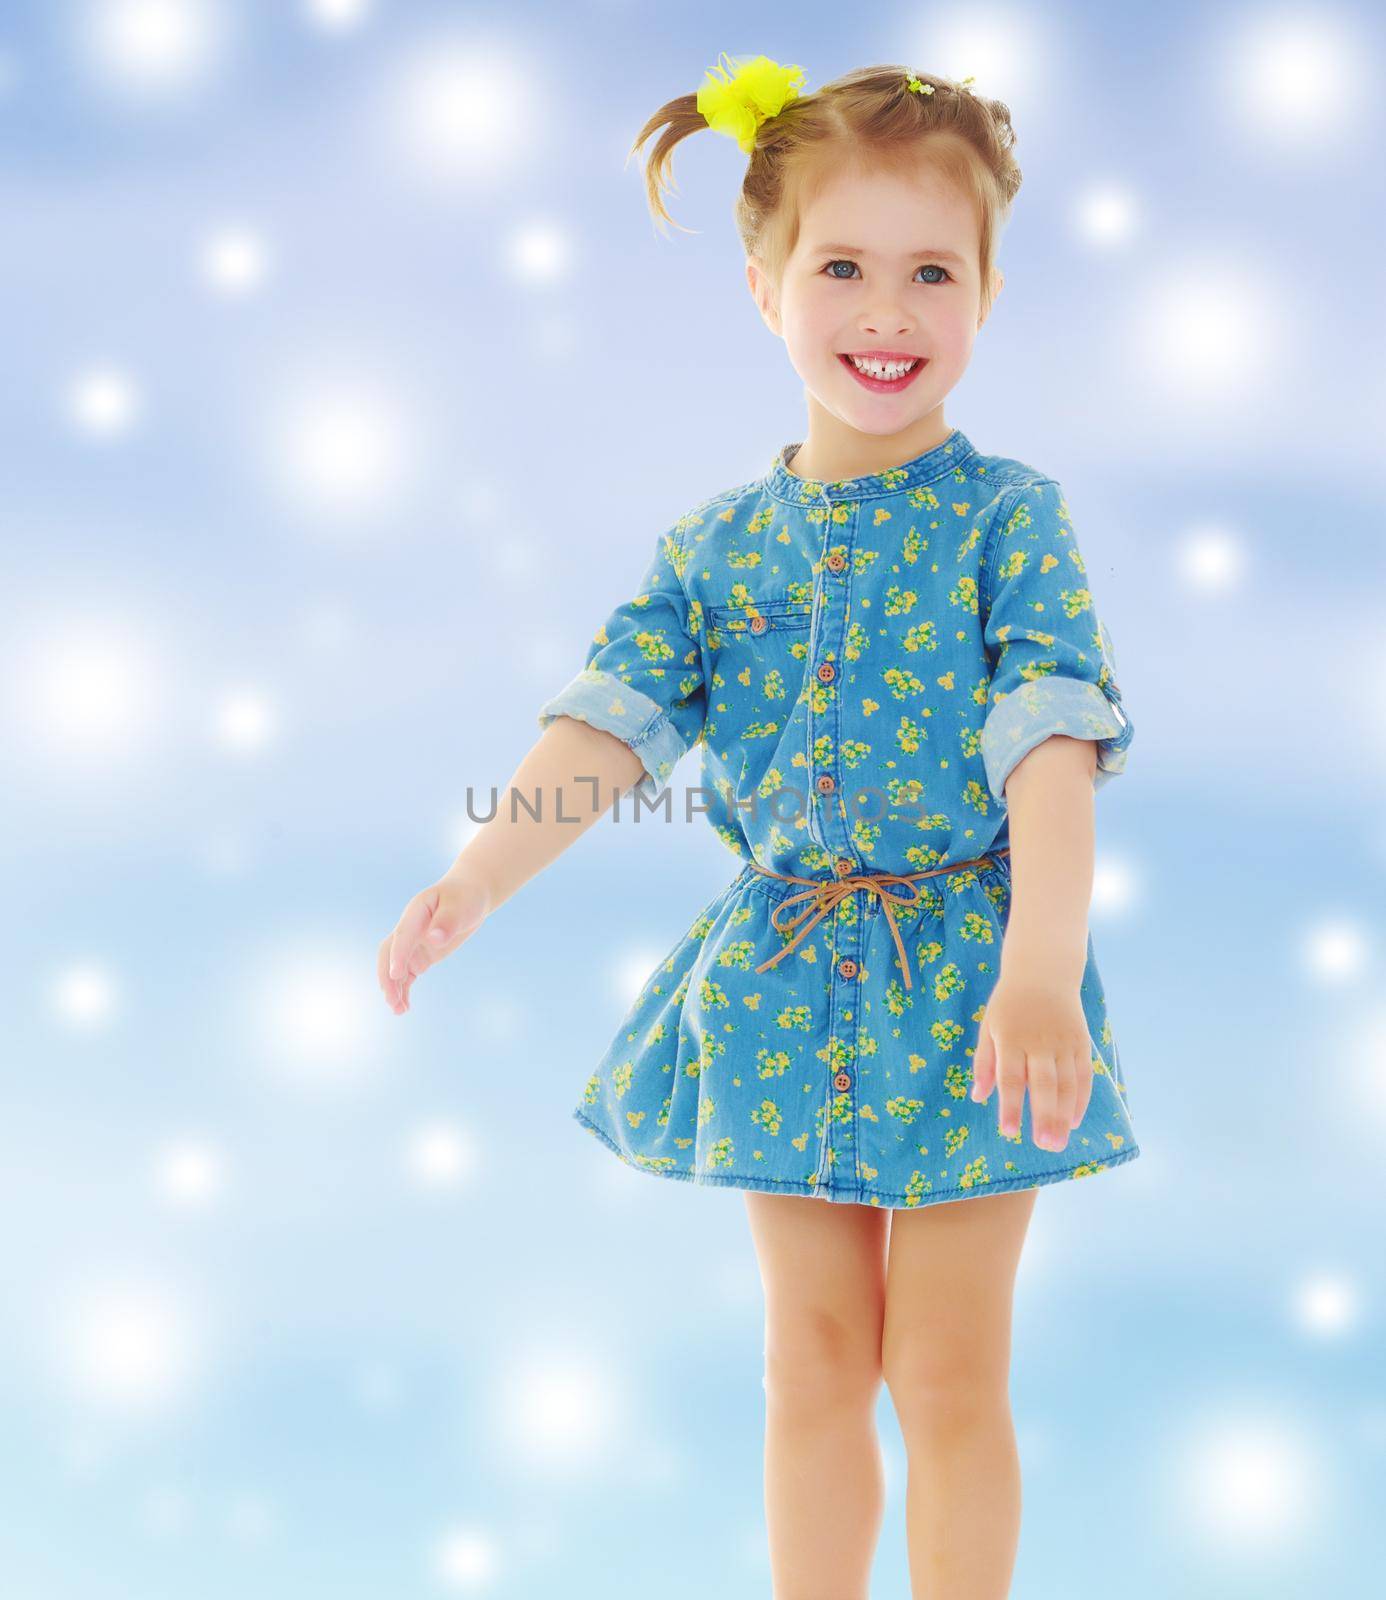 Laughing little girl in a short summer dress. Gentle blue Christmas background with white snowflakes abstract.